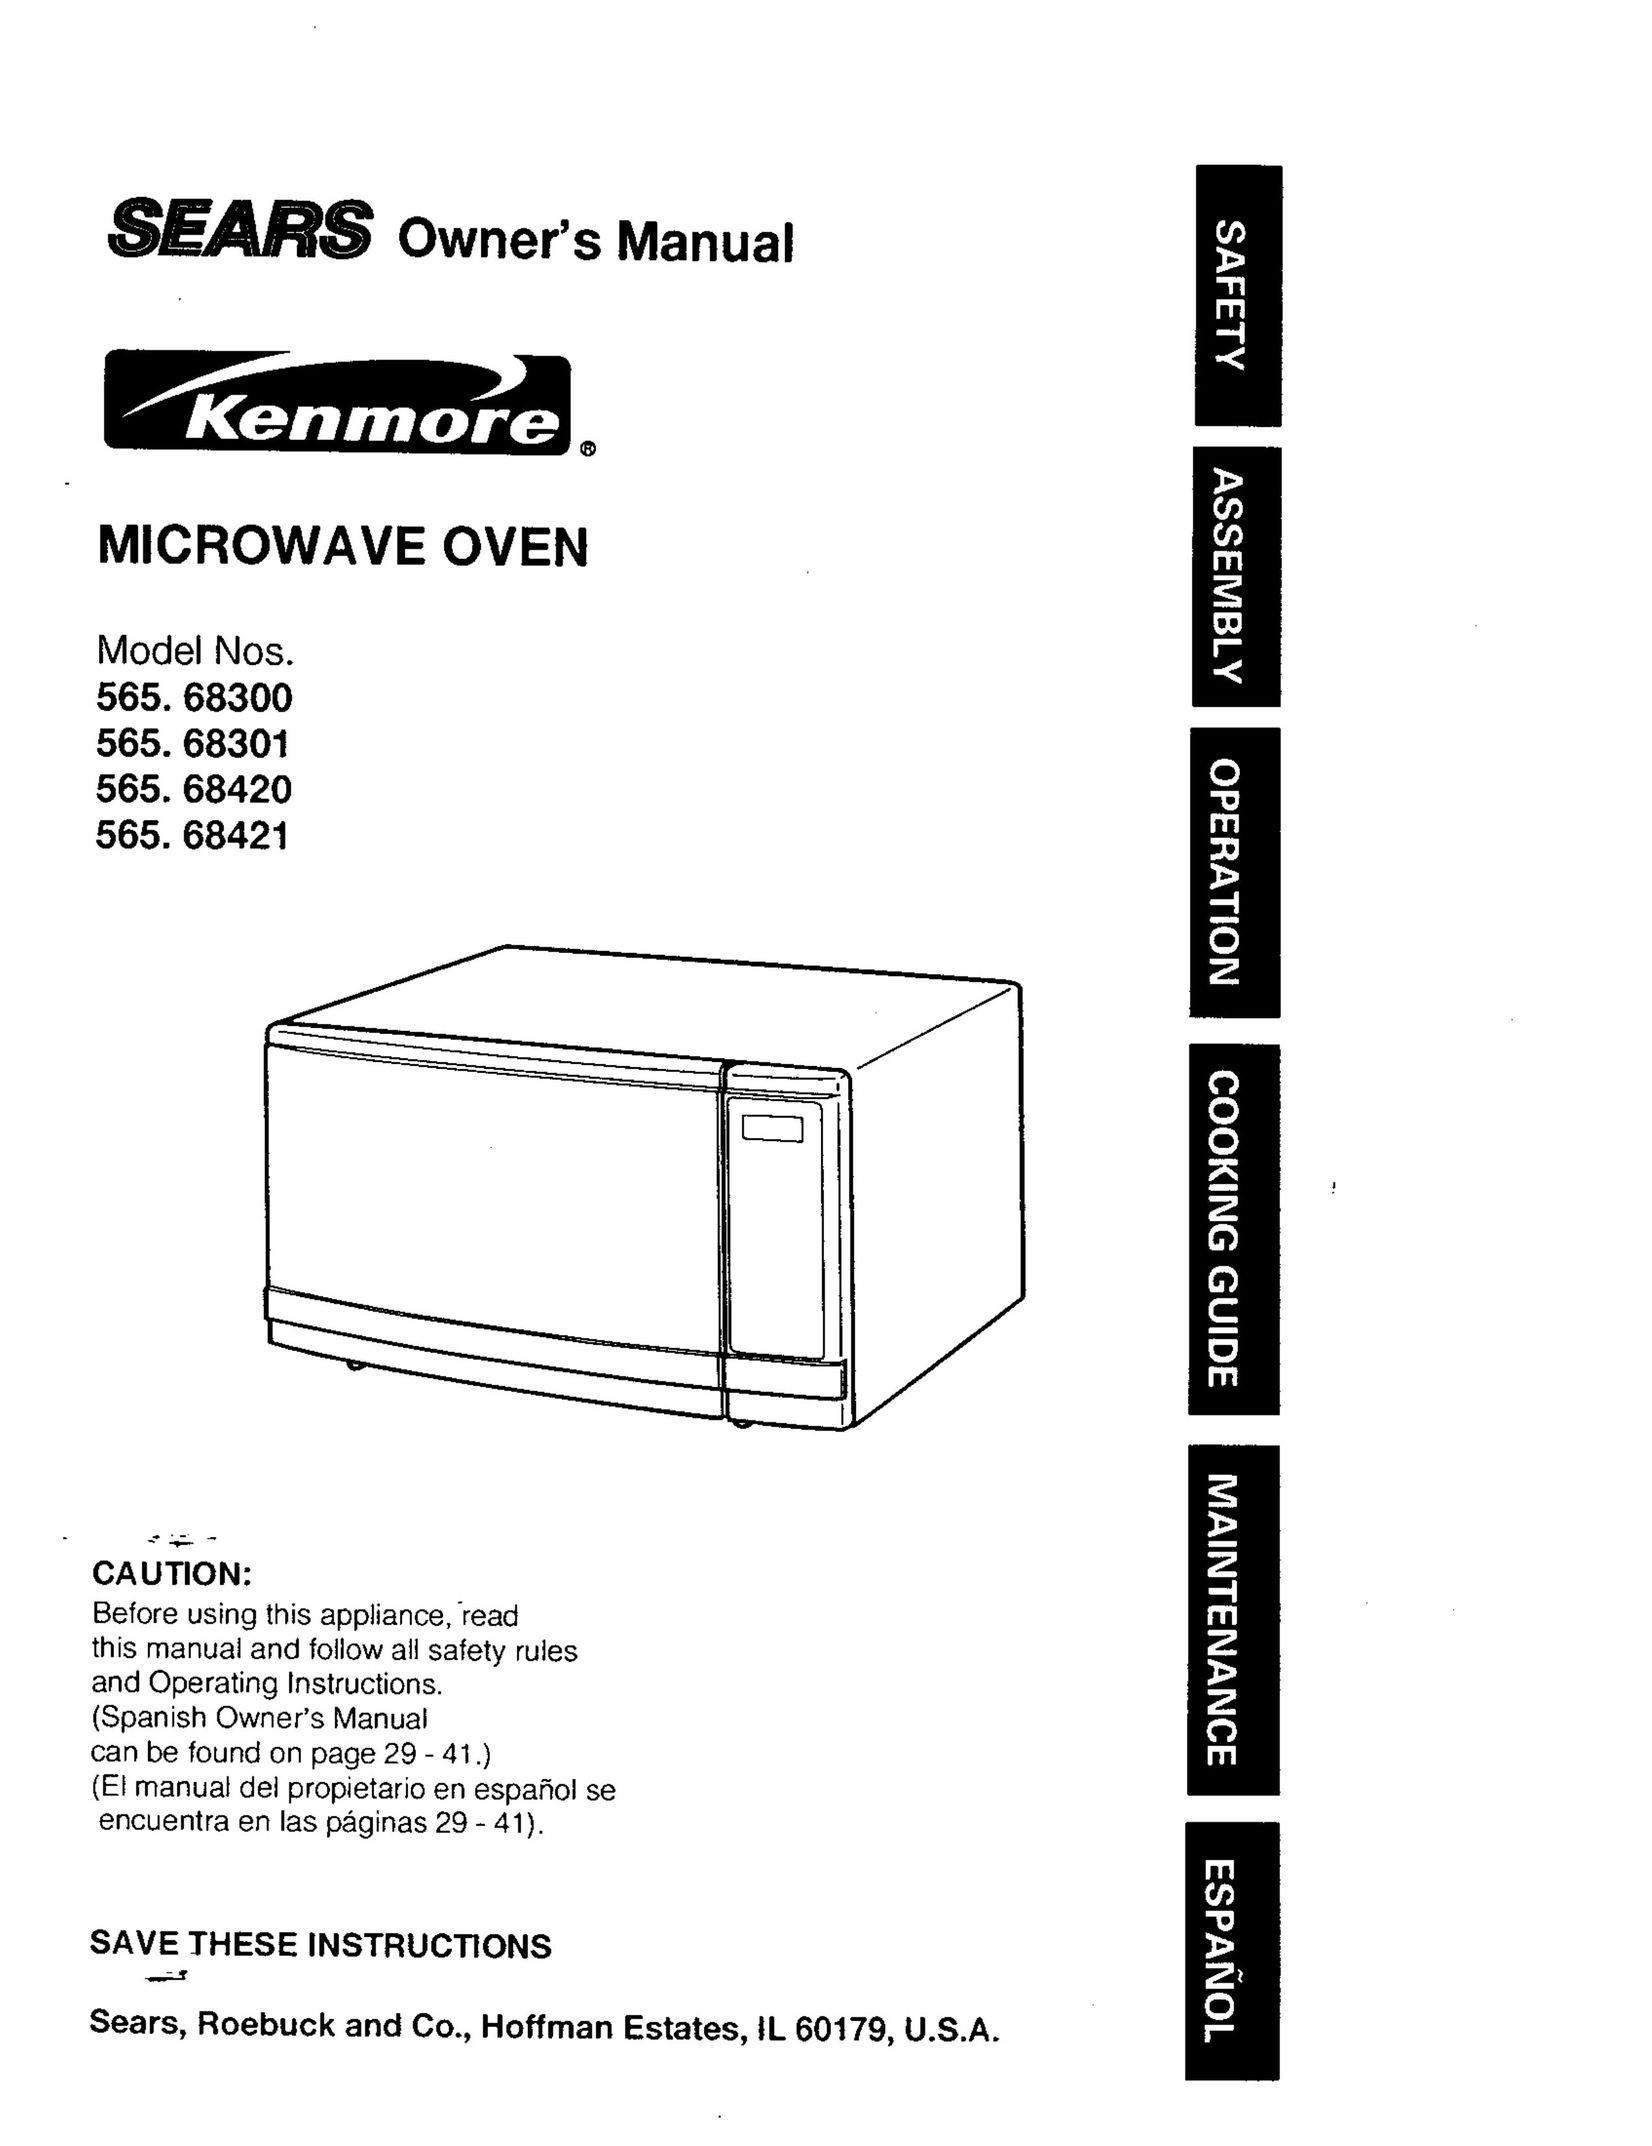 Kenmore 565.68420 Microwave Oven User Manual